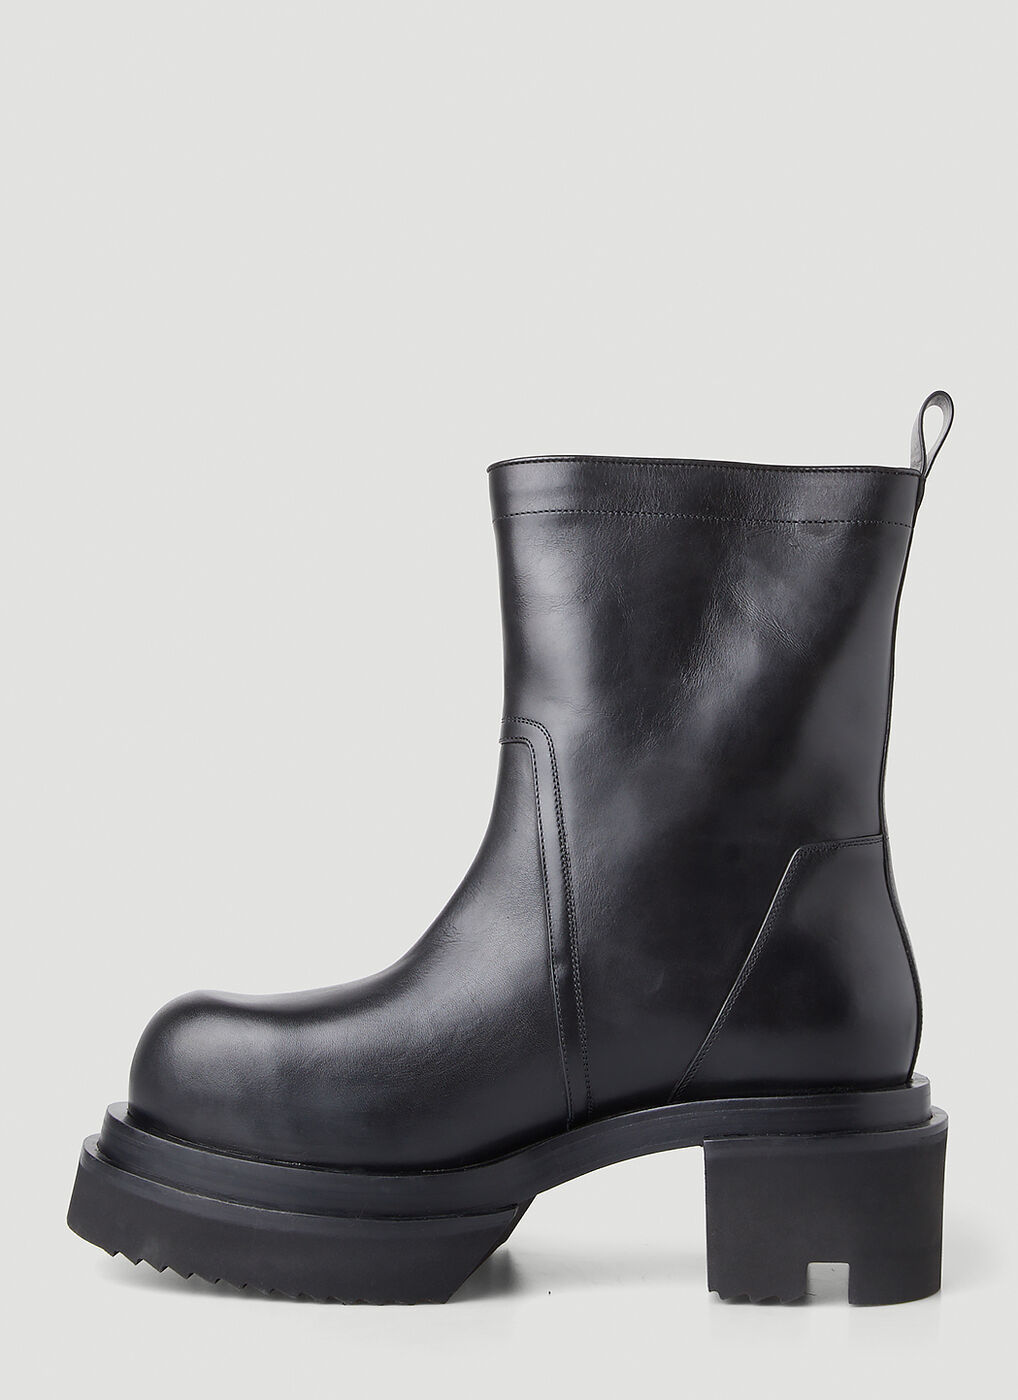 Tread Sole Leather Boots in Black